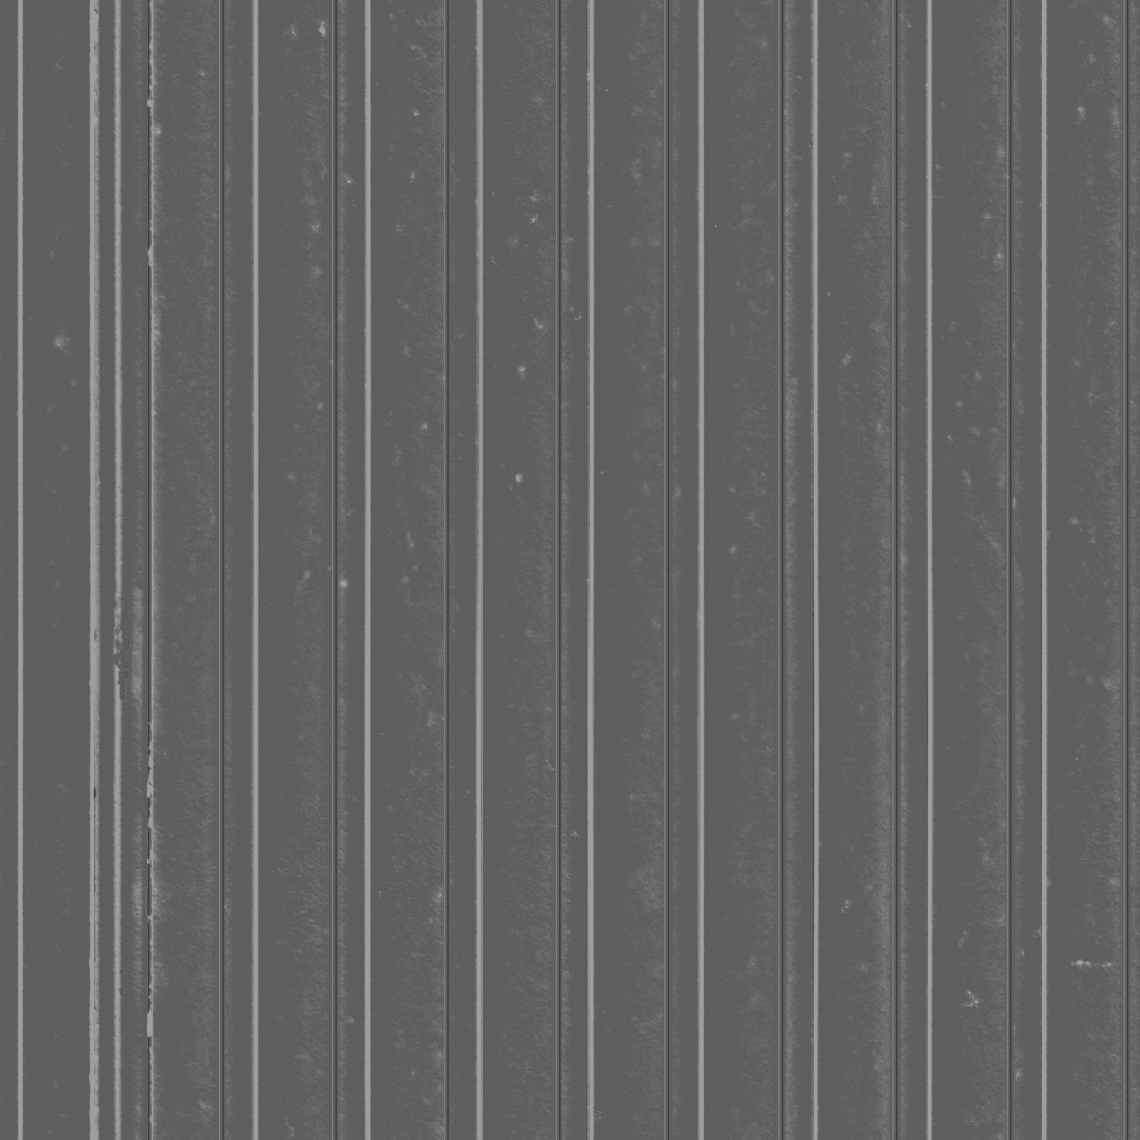 Corrugated-Metal-01-Roughness